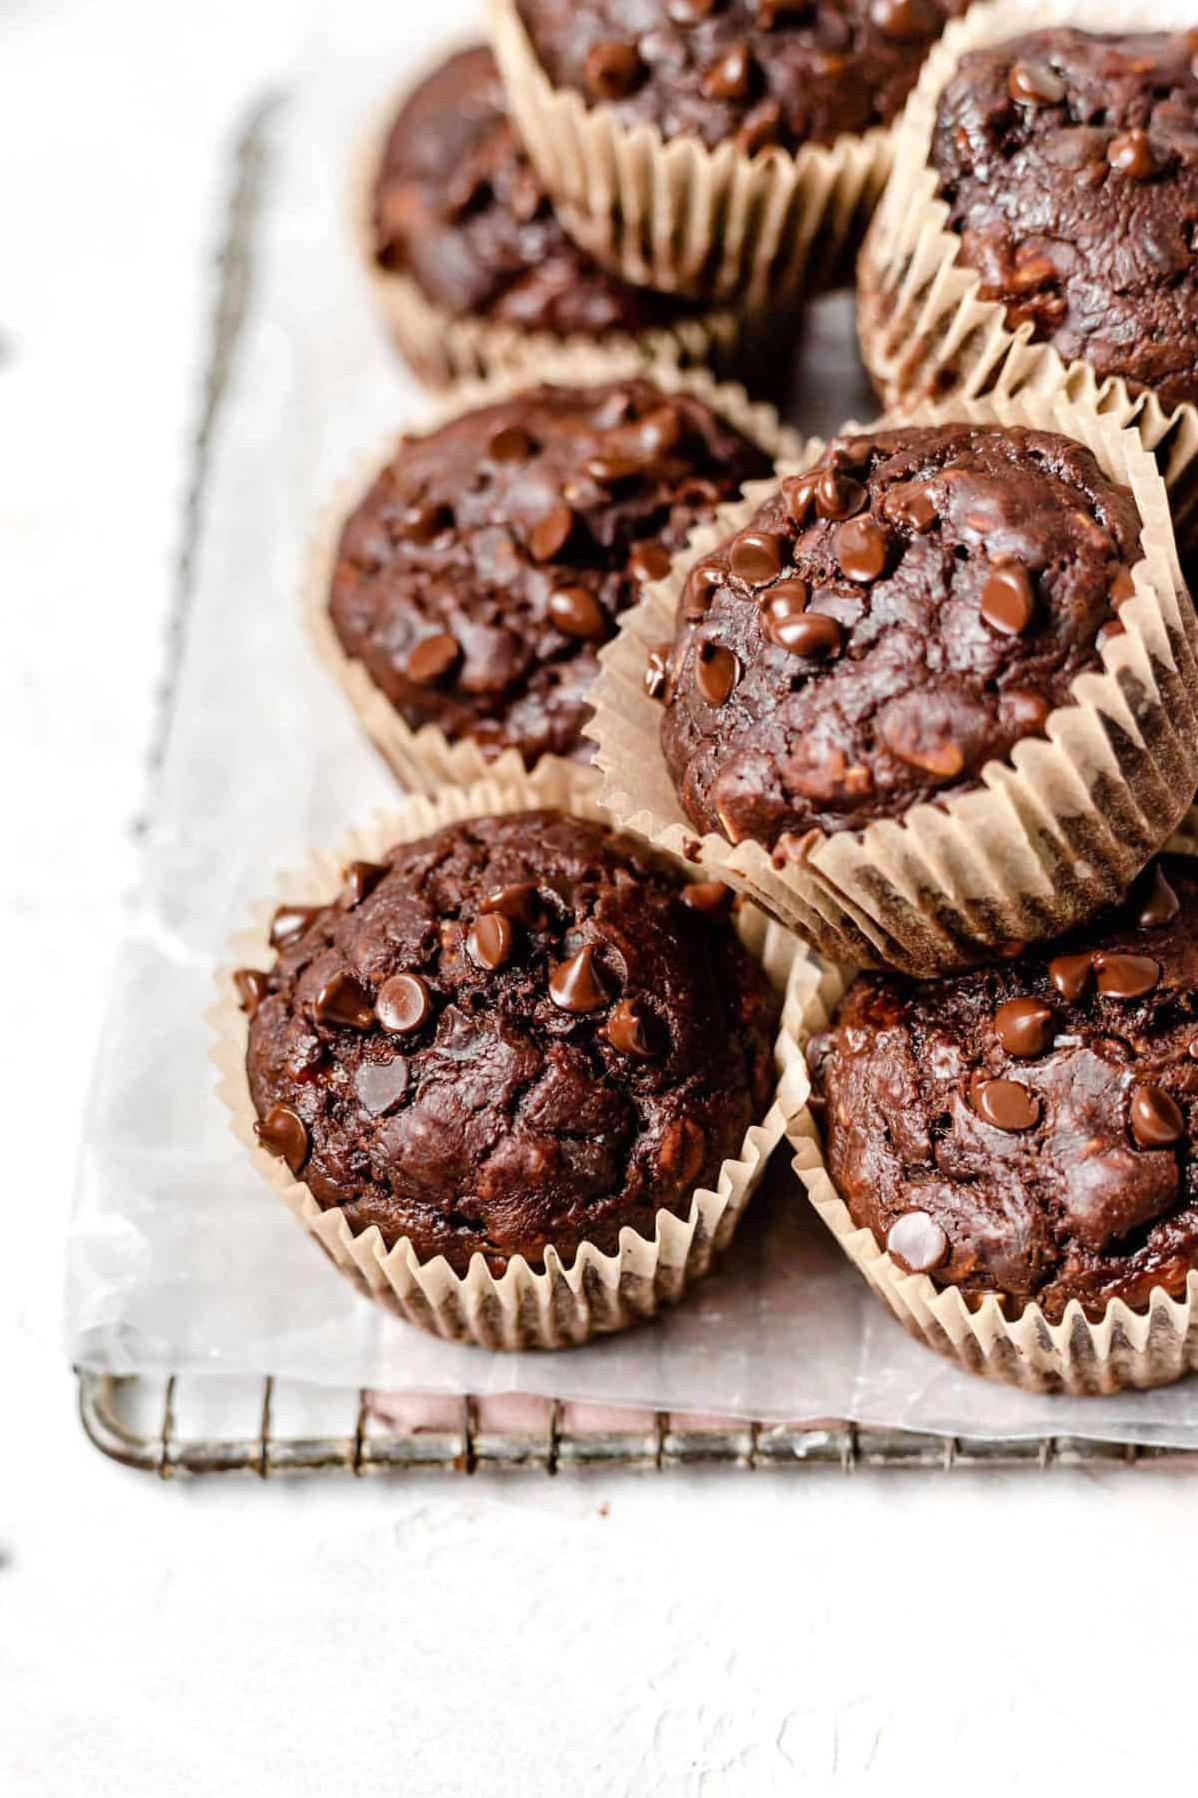  Get your daily dose of chocolate with these irresistible muffins.